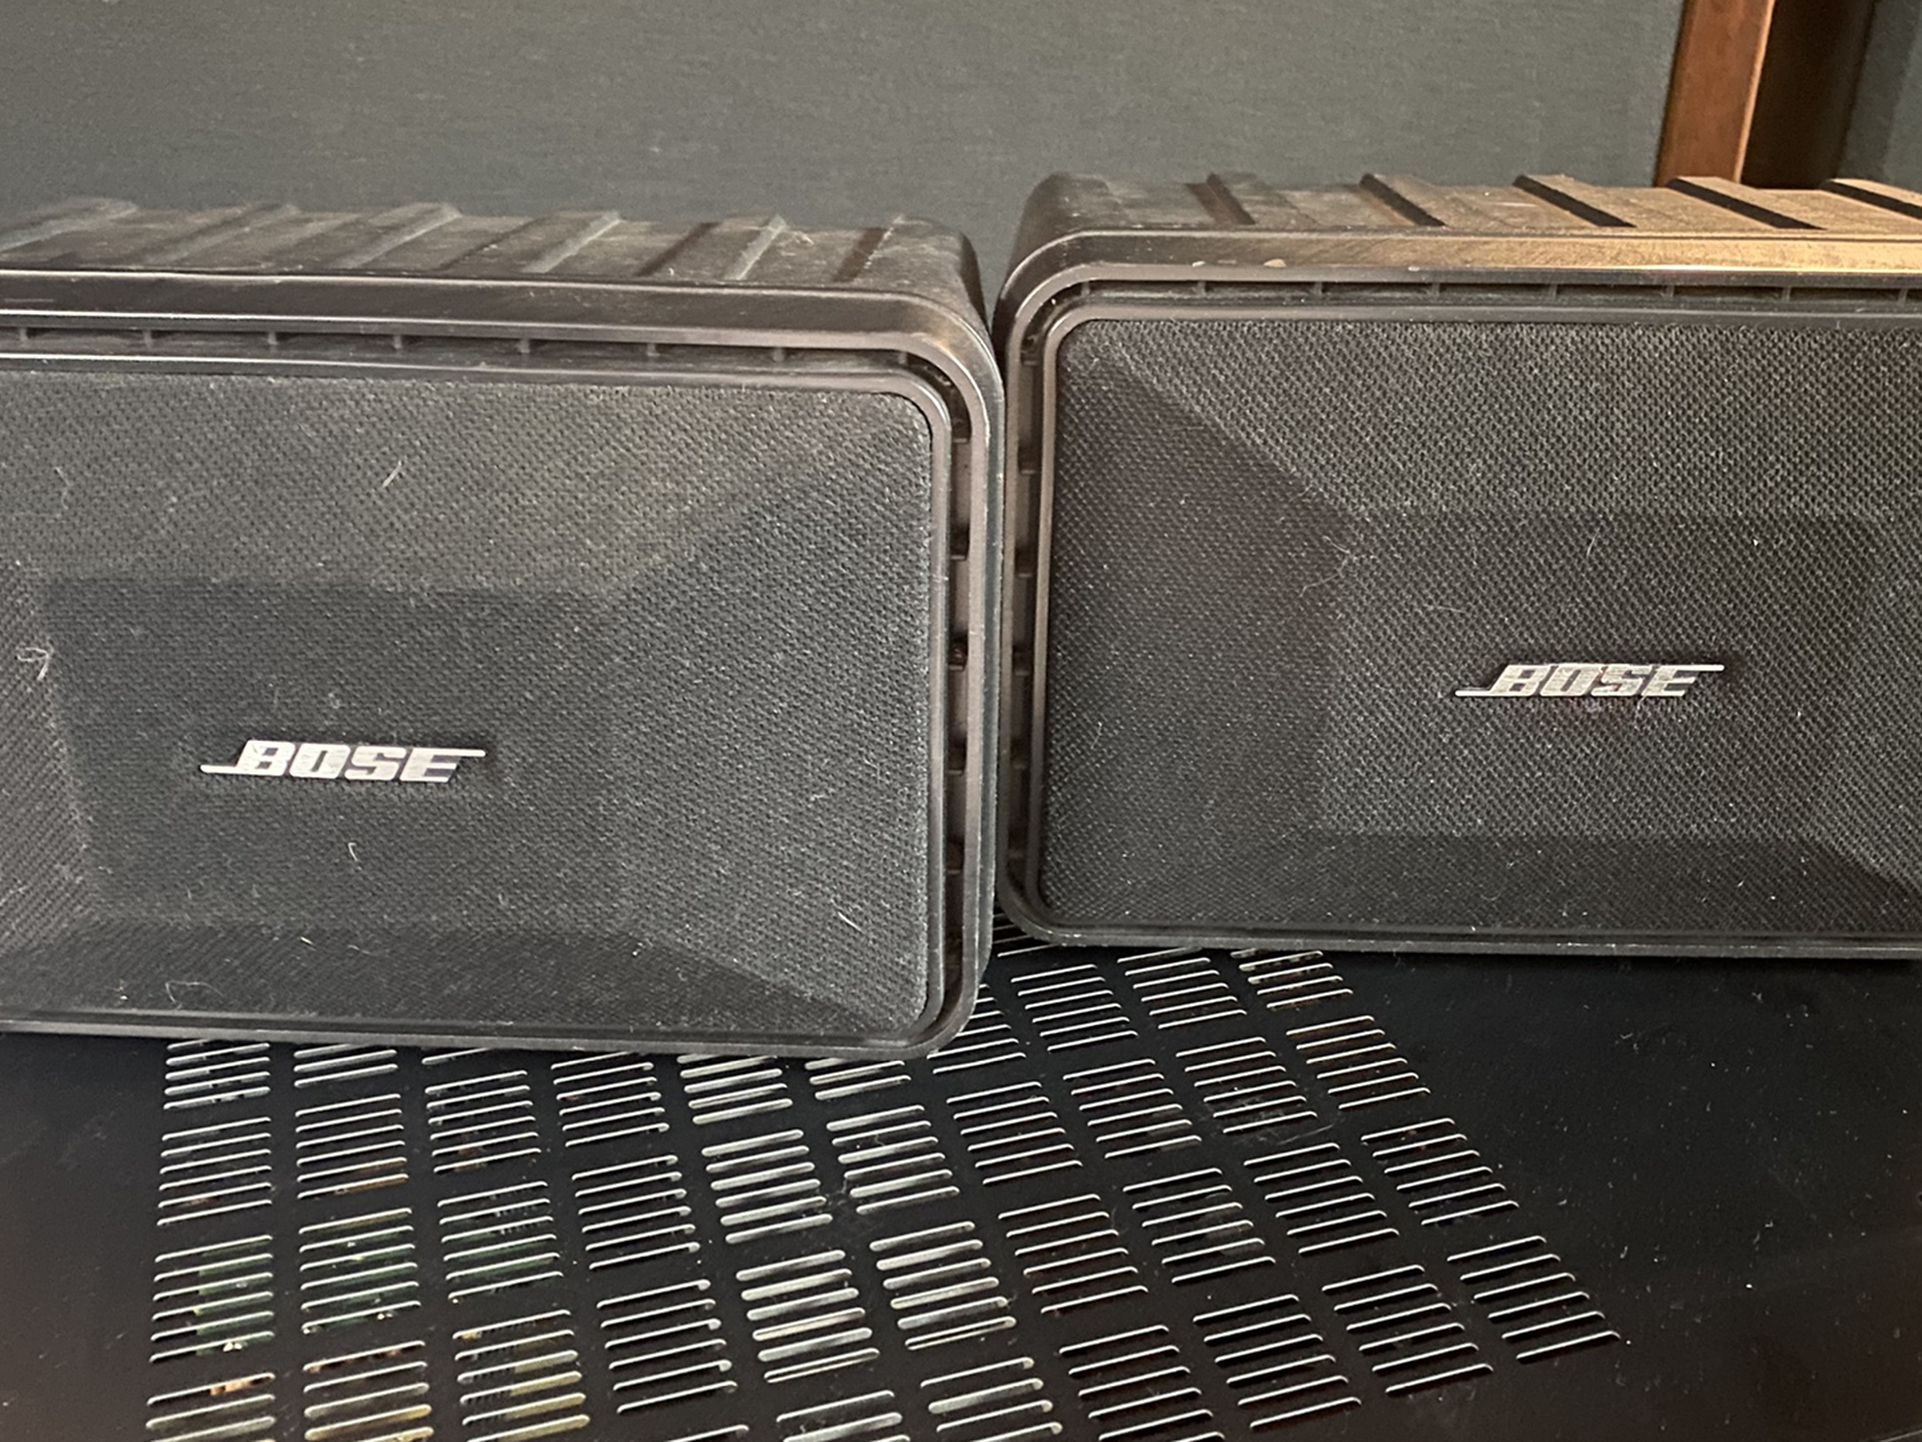 BOSE ROOMMATE POWERED SPEAKER SYSTEM WITH BLUETOOTH🔊